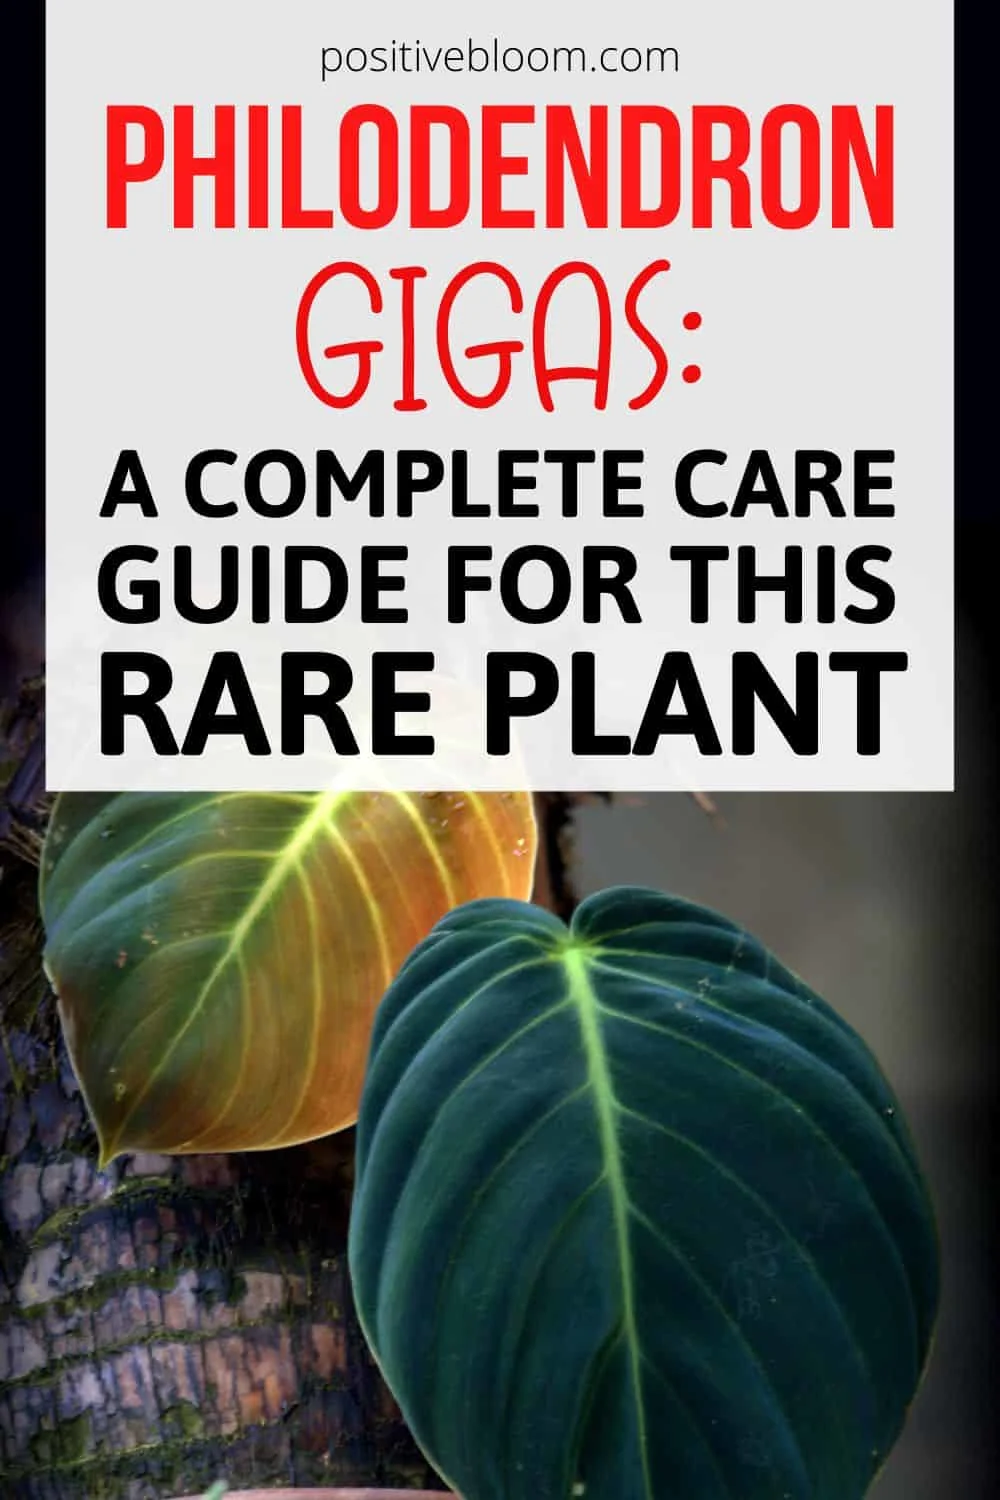 Philodendron Gigas A Complete Care Guide For This Rare Plant